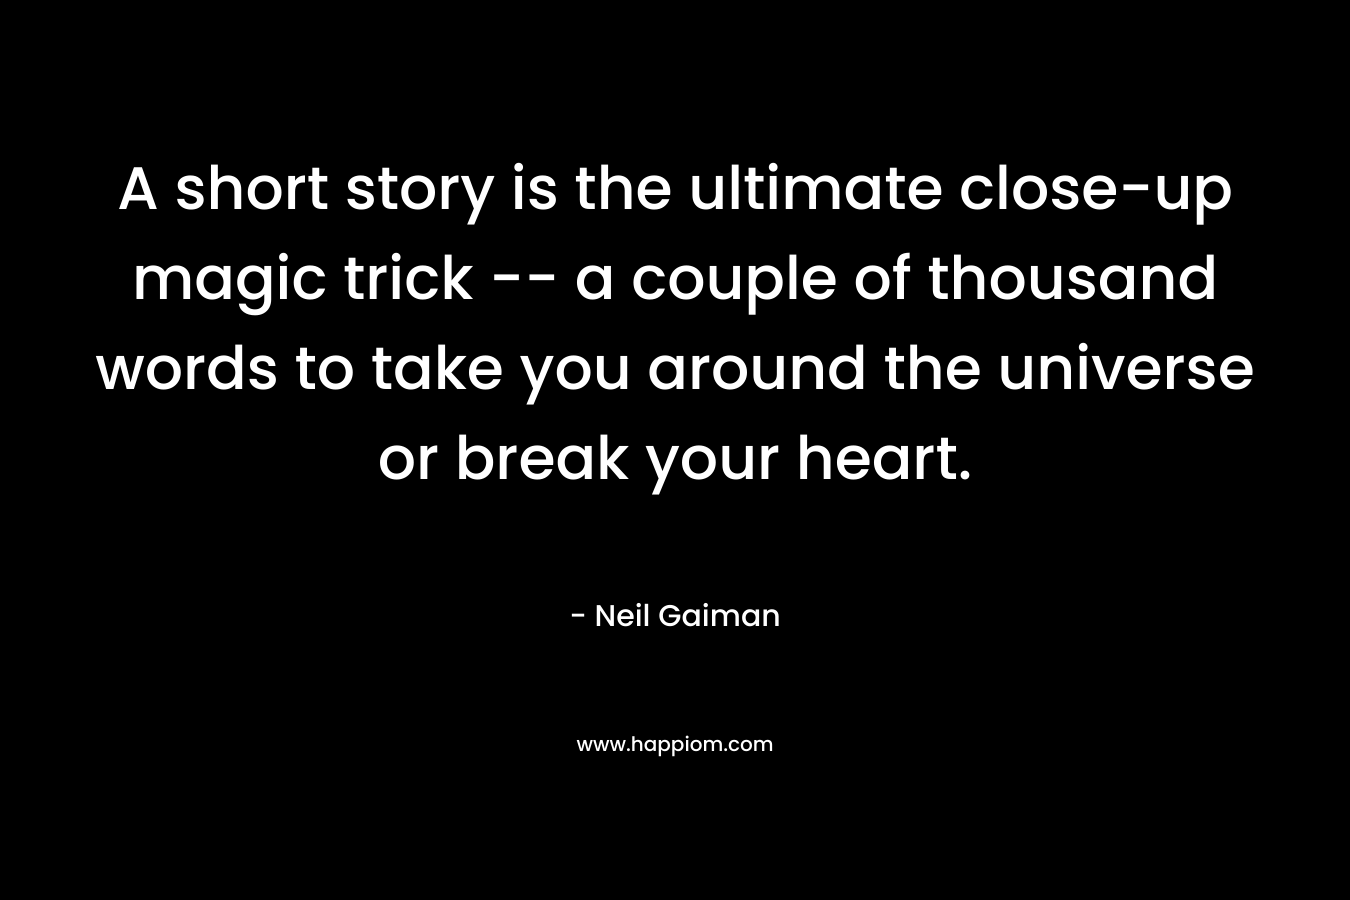 A short story is the ultimate close-up magic trick — a couple of thousand words to take you around the universe or break your heart. – Neil Gaiman